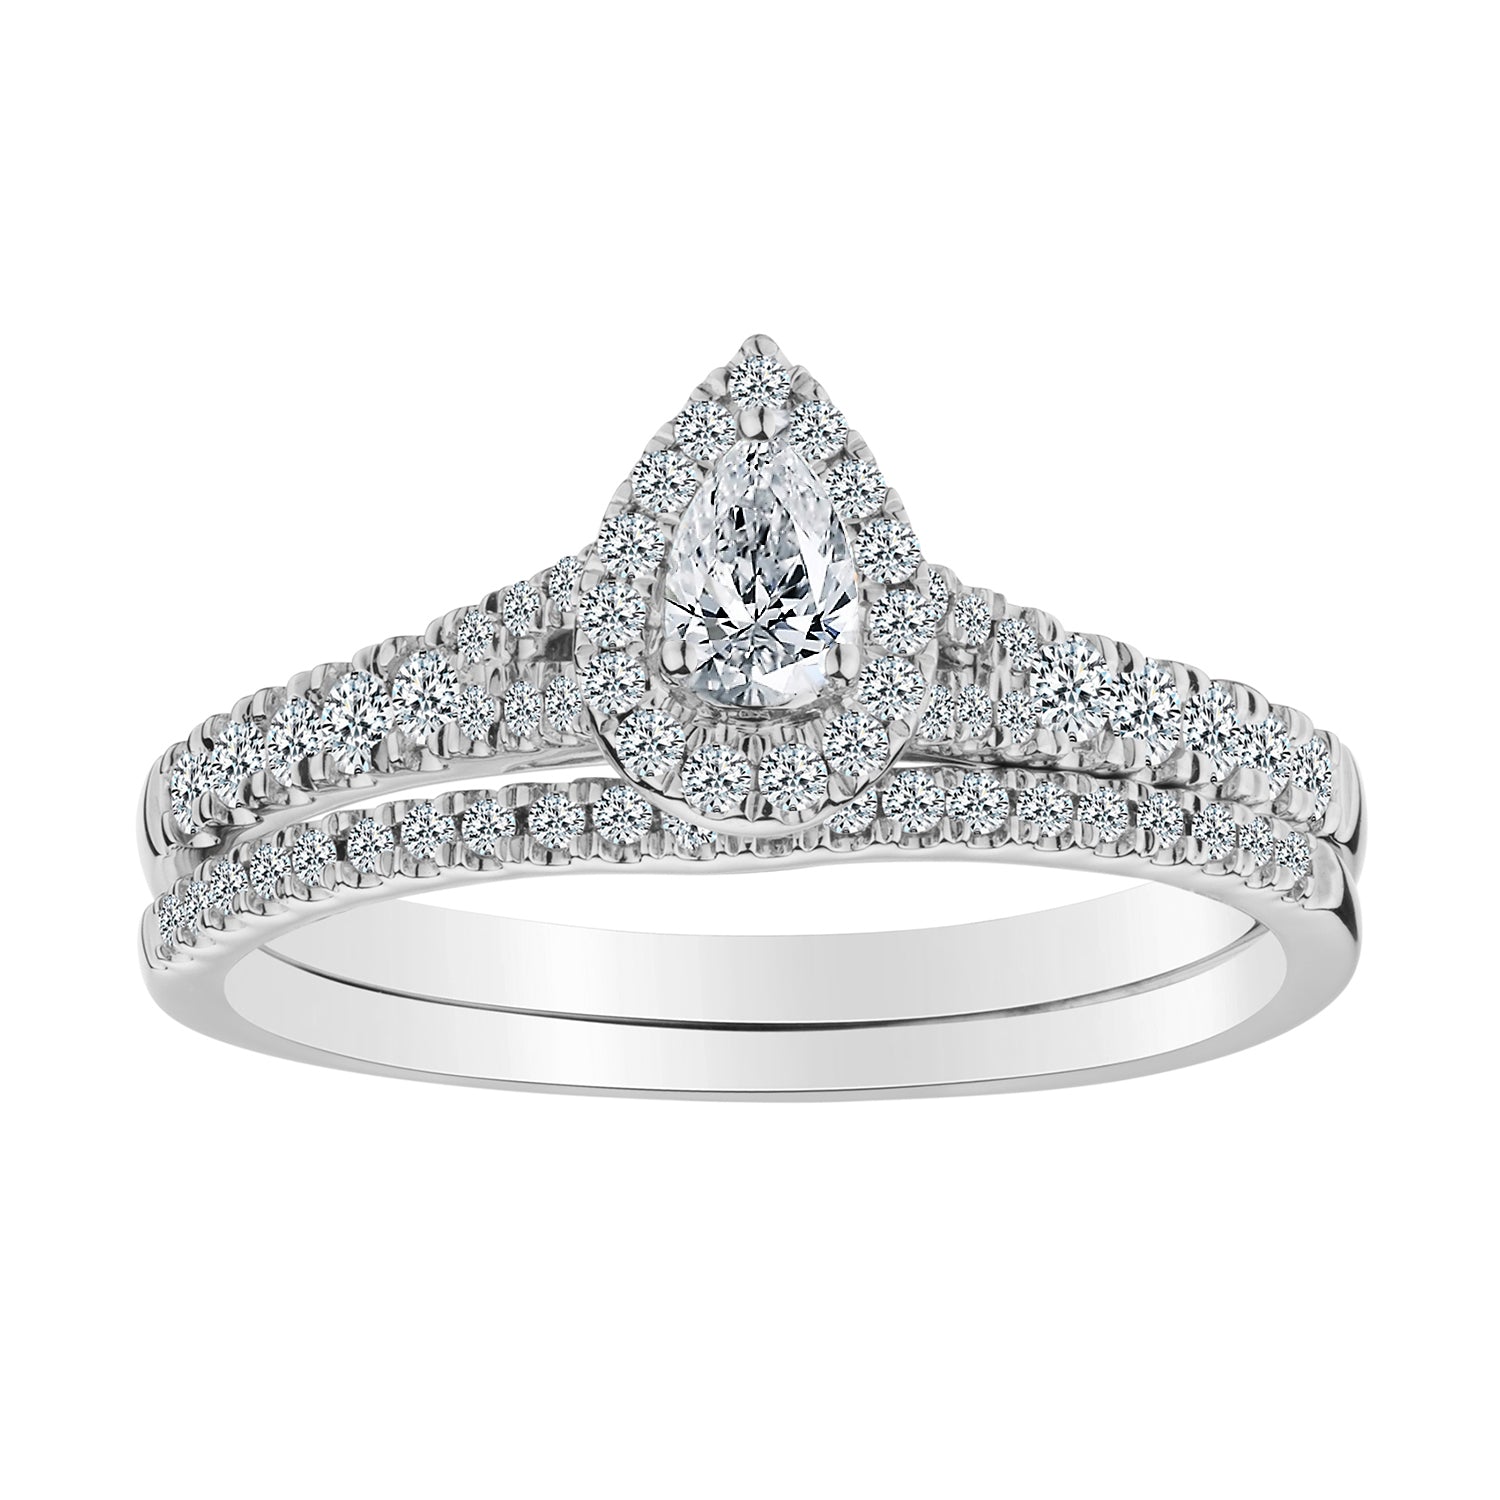 .16 Carat Pear Shape Cut Centre,  .50 Carat Total Diamond Weight Ring Set,  14kt White Gold. Griffin Jewellery Designs